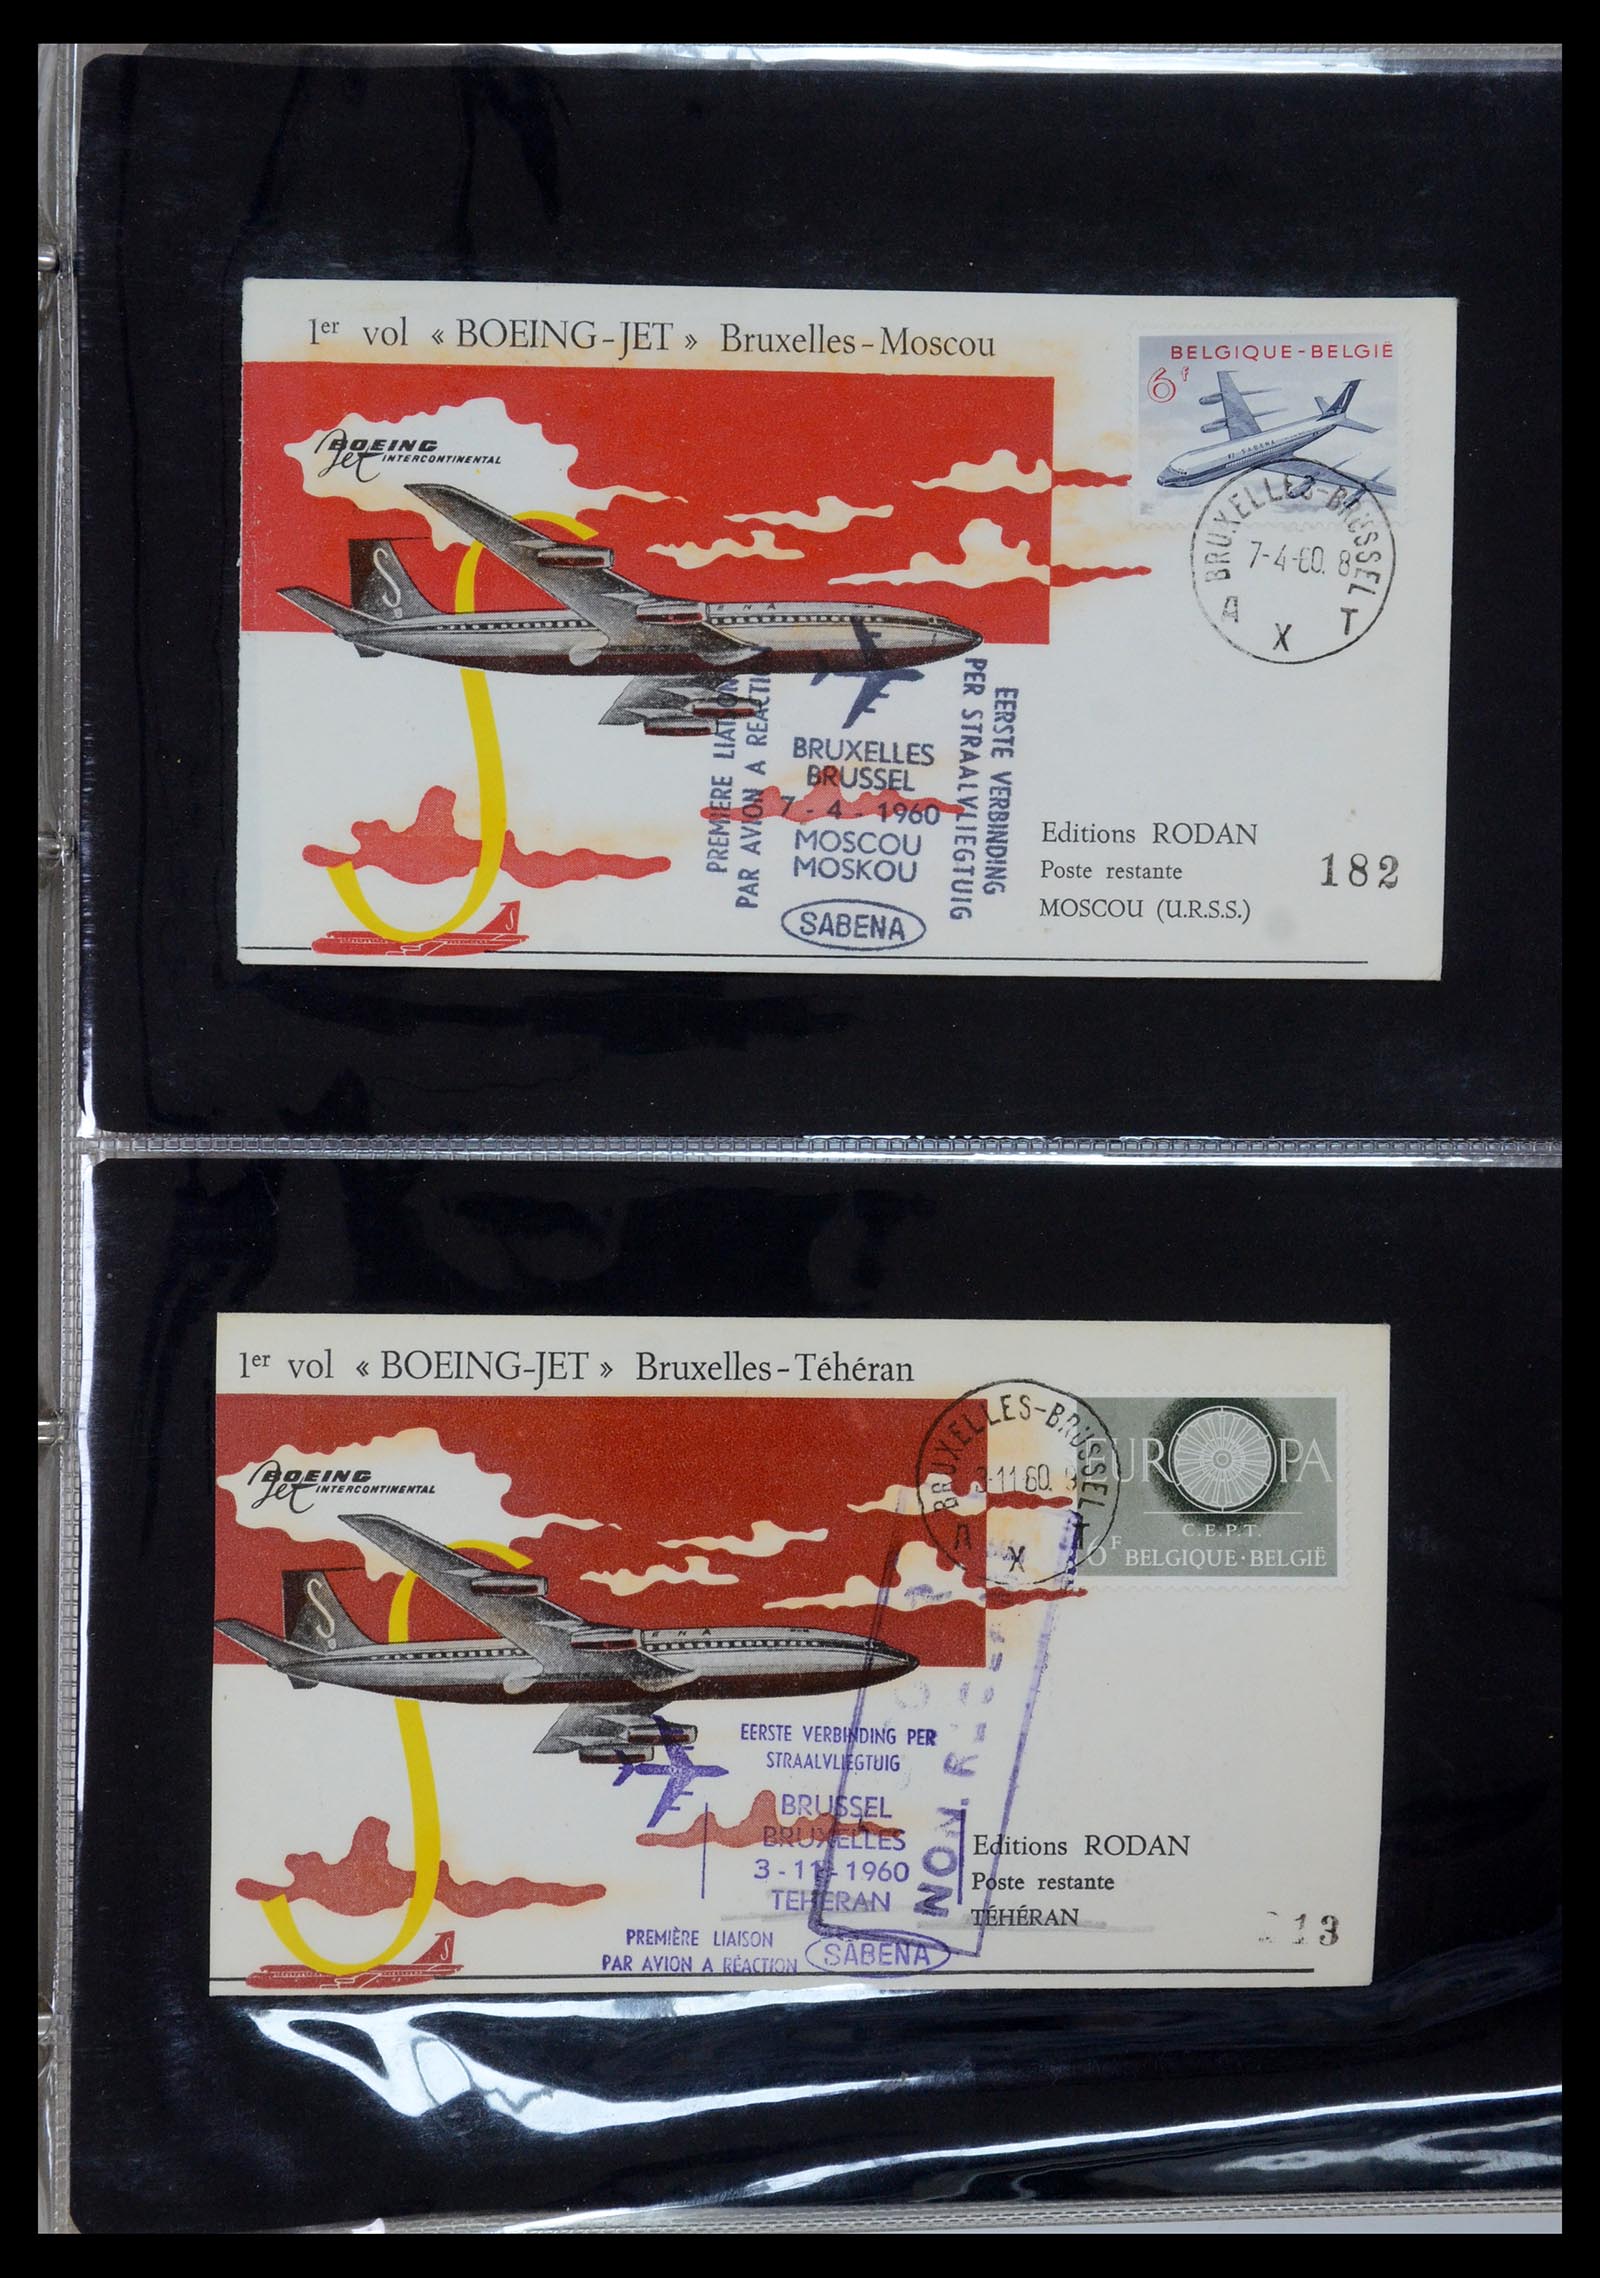 35736 072 - Stamp Collection 35736 World airmail covers.